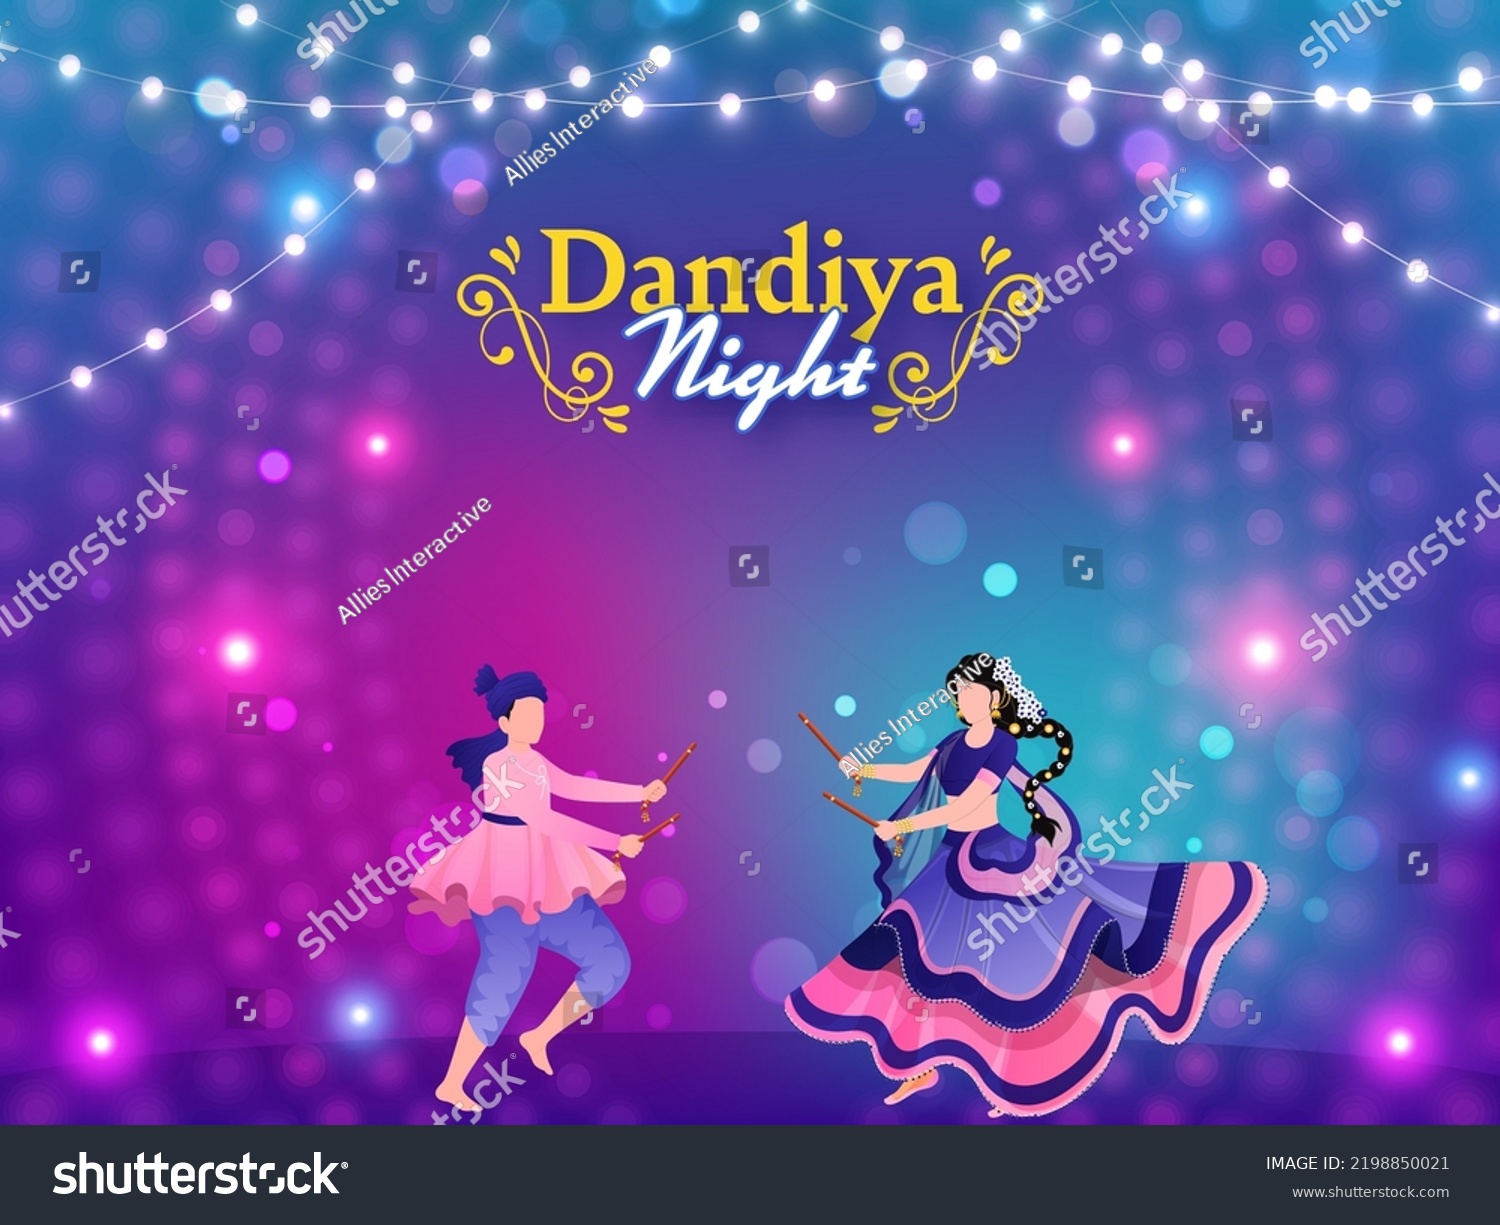 SVG of Dandiya Night Celebration Background Decorated With Lighting Garland And Faceless Indian Couple Dancing Together. svg